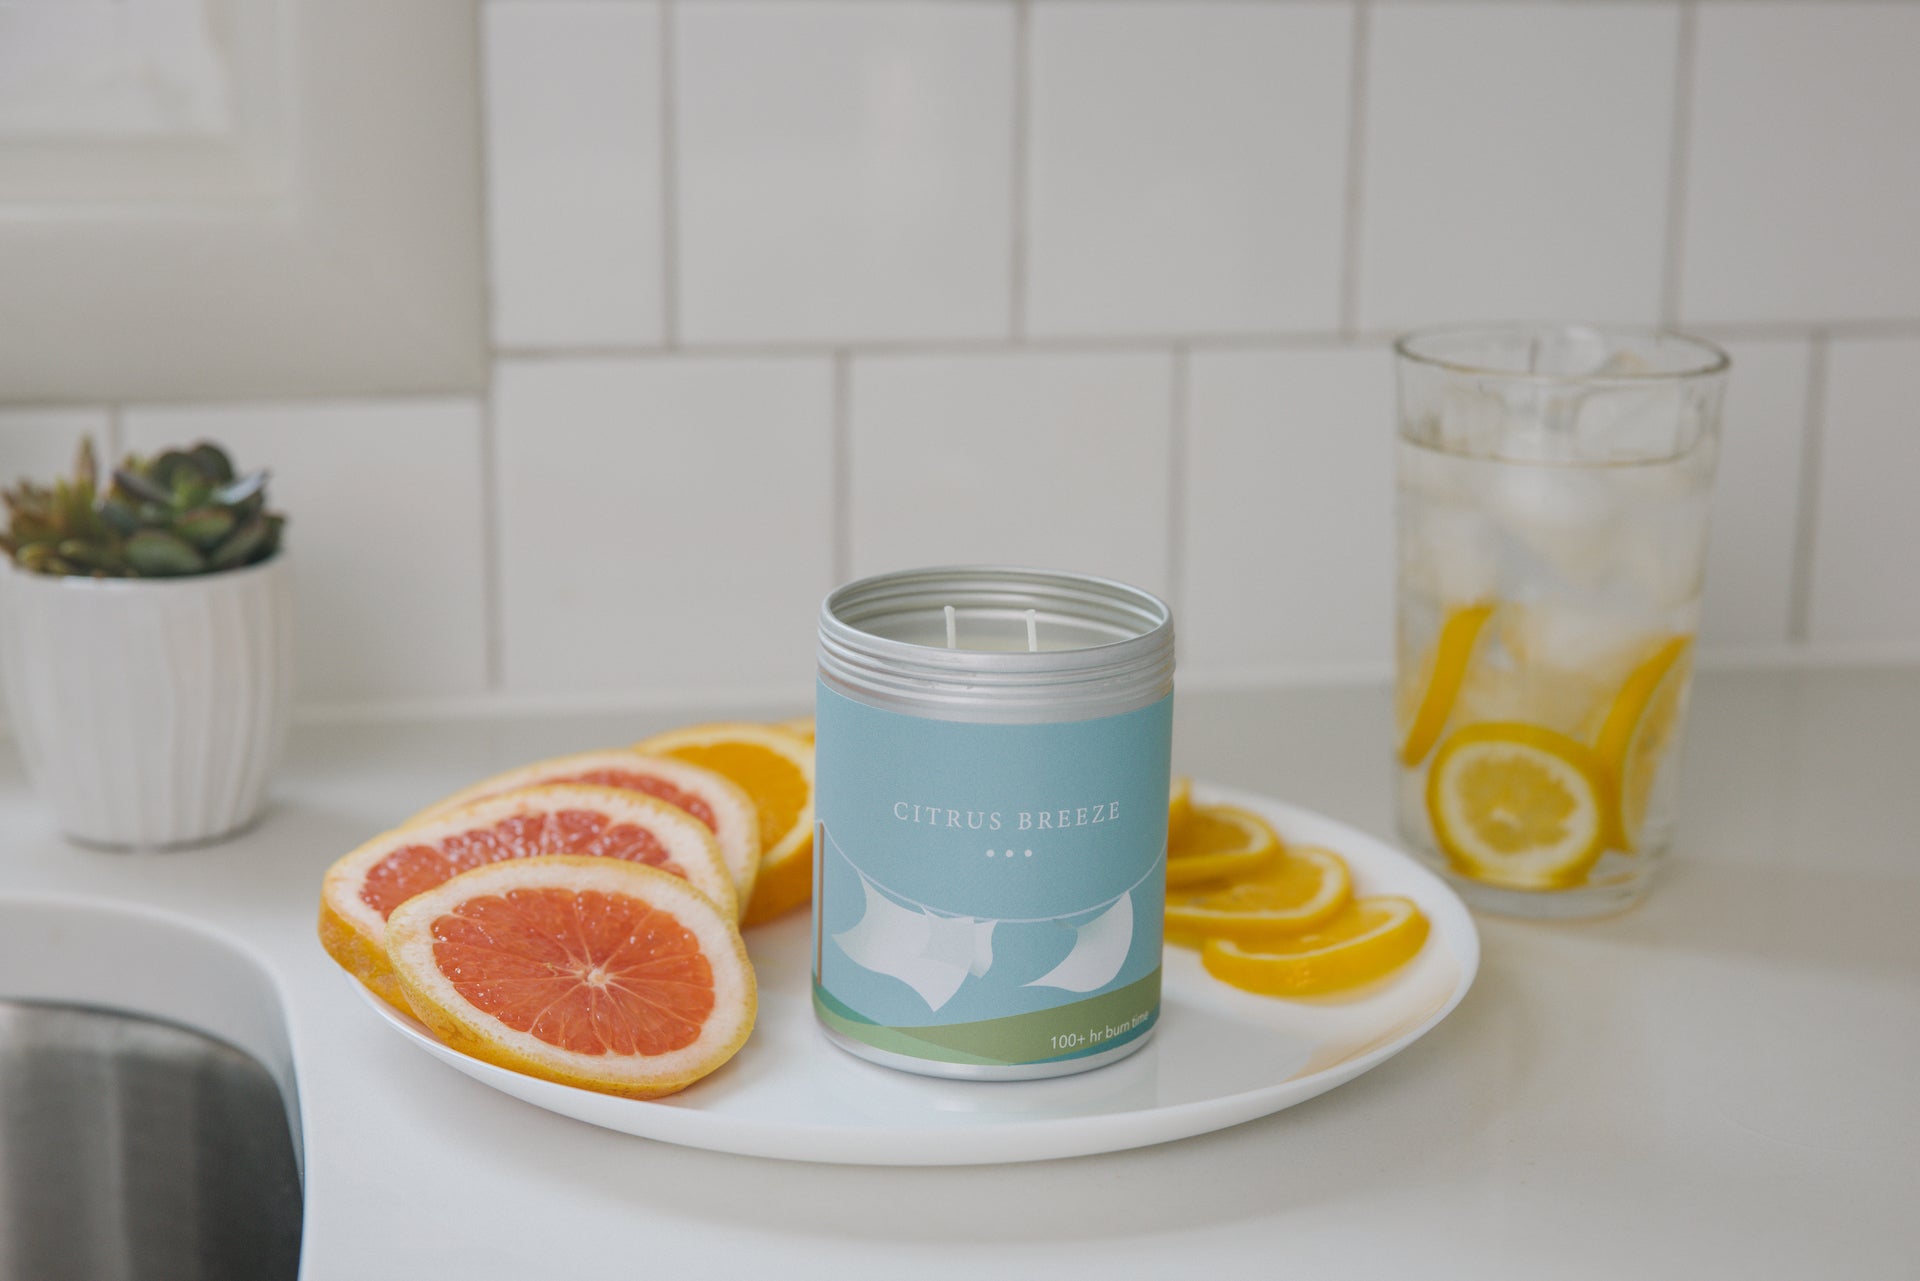 Citrus Breeze candle on a plate with citrus